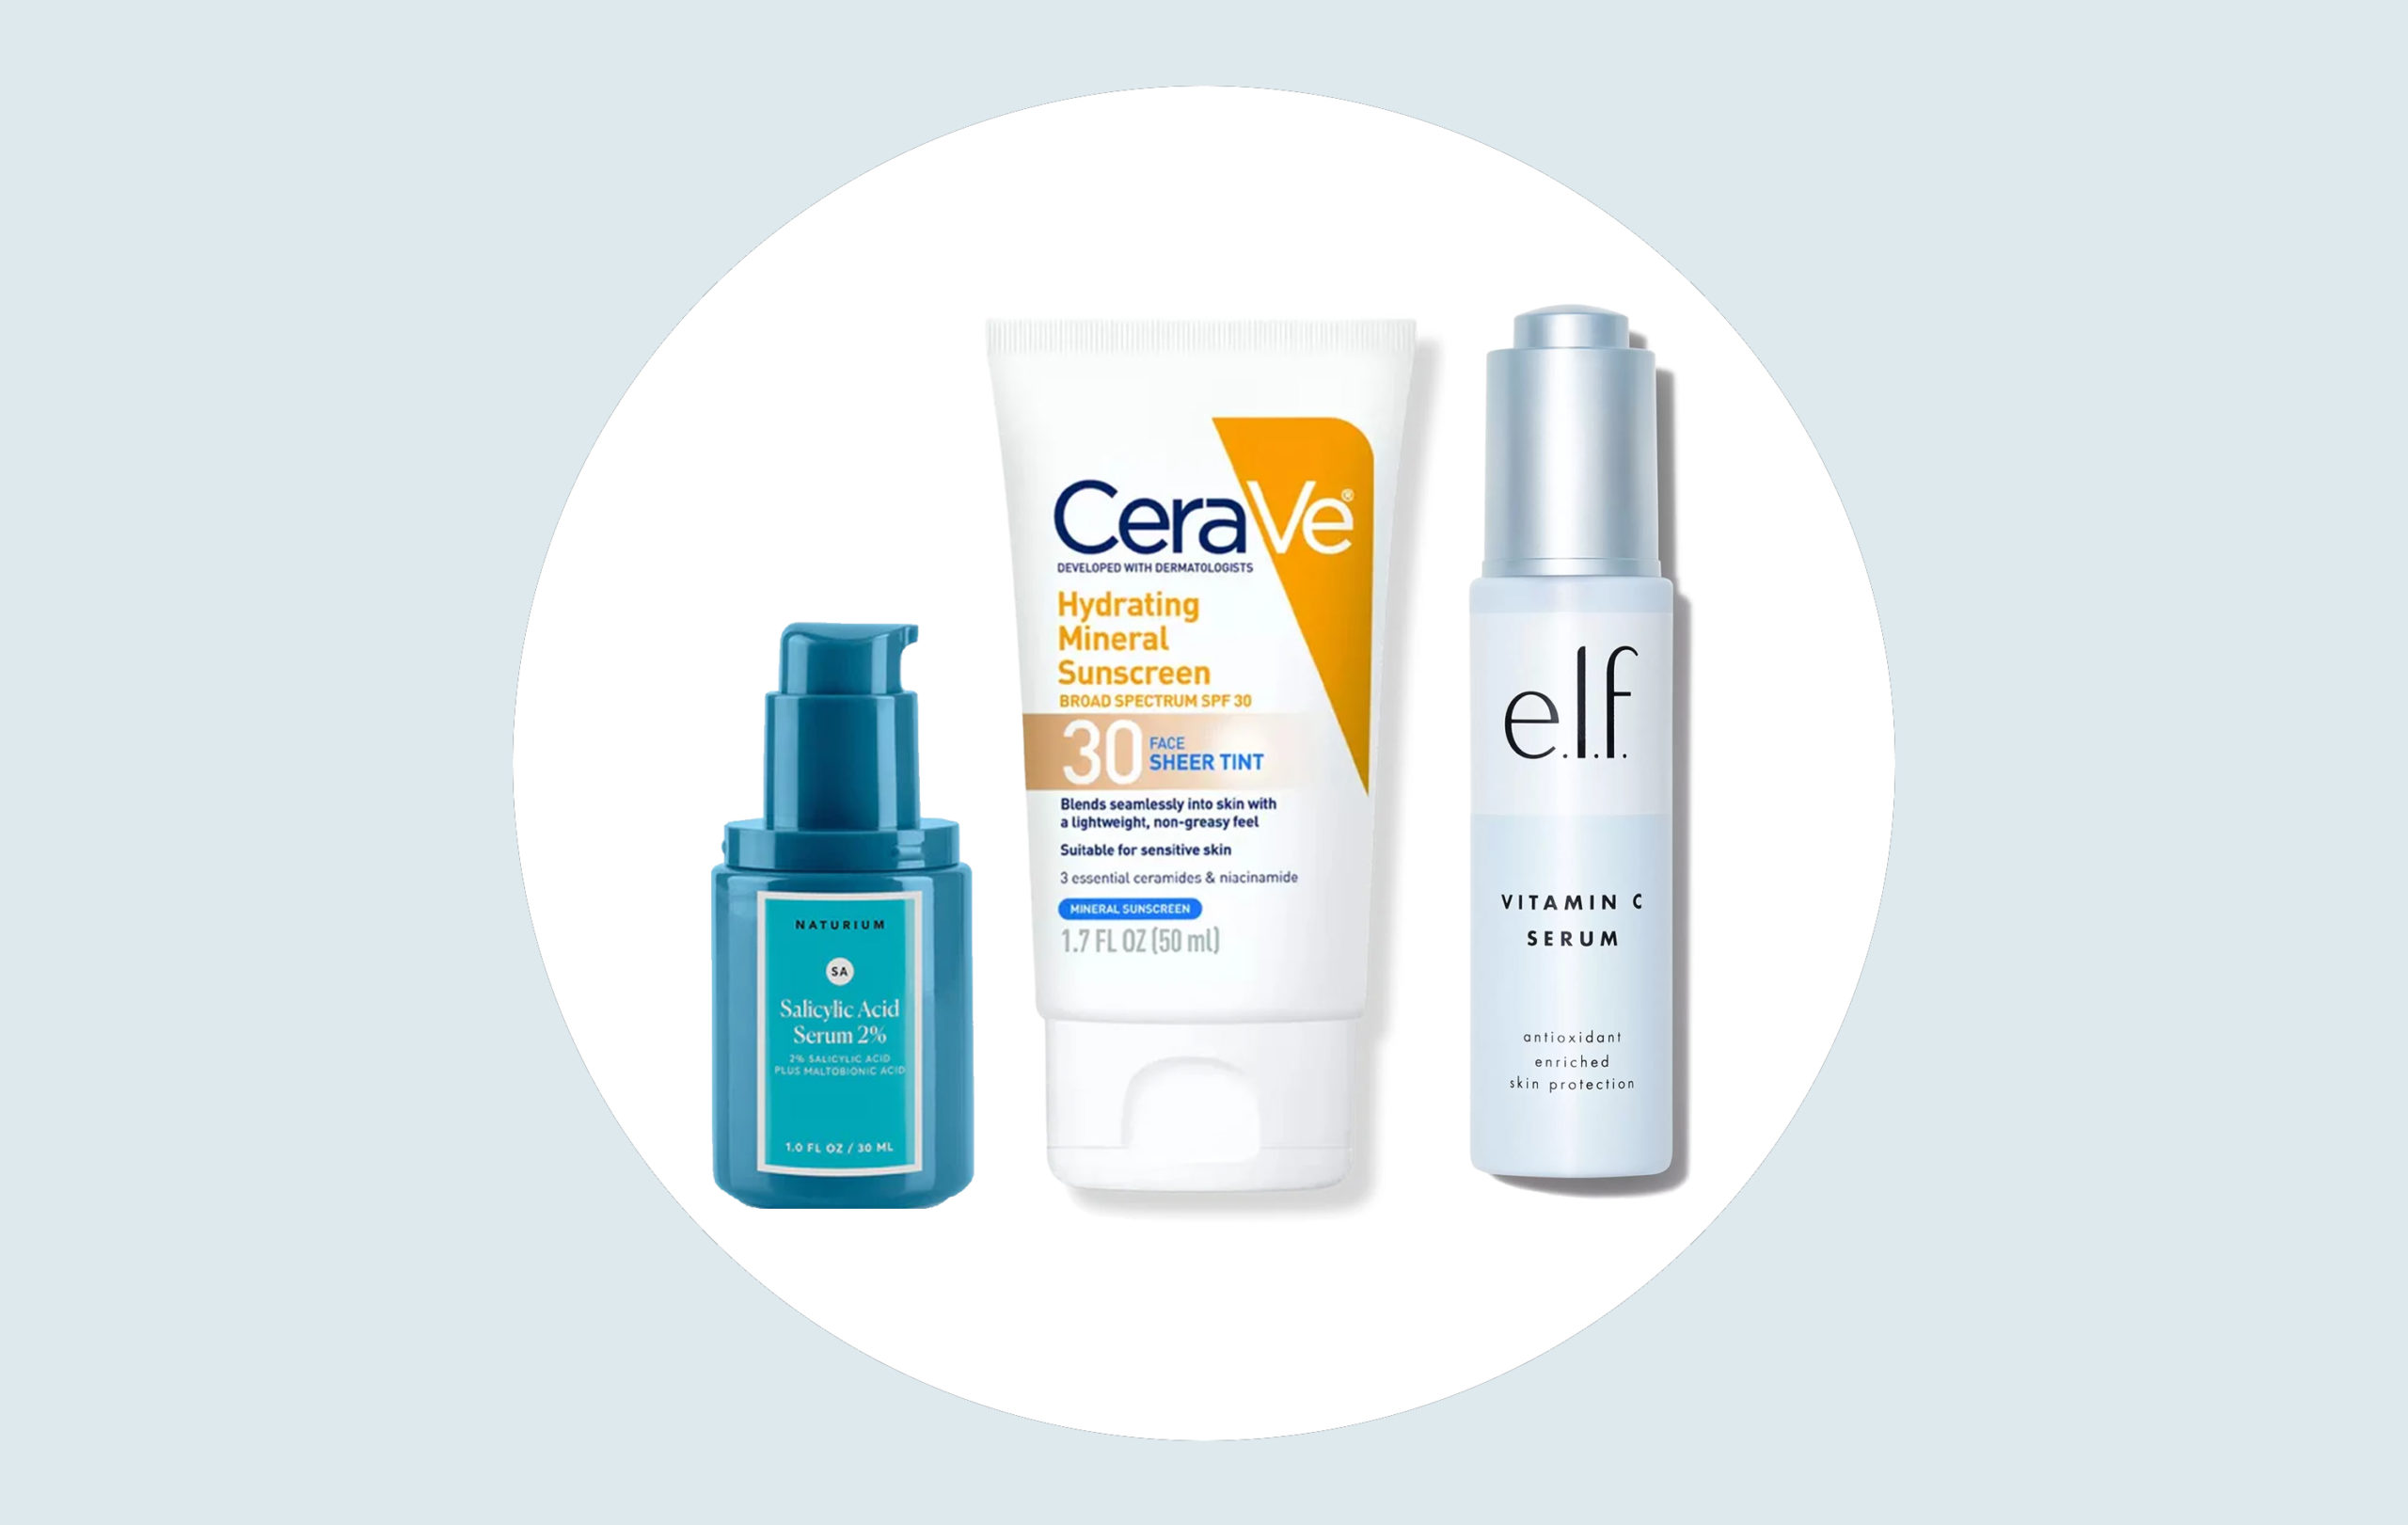 The 30 best facial skincare products for under £20, Skincare